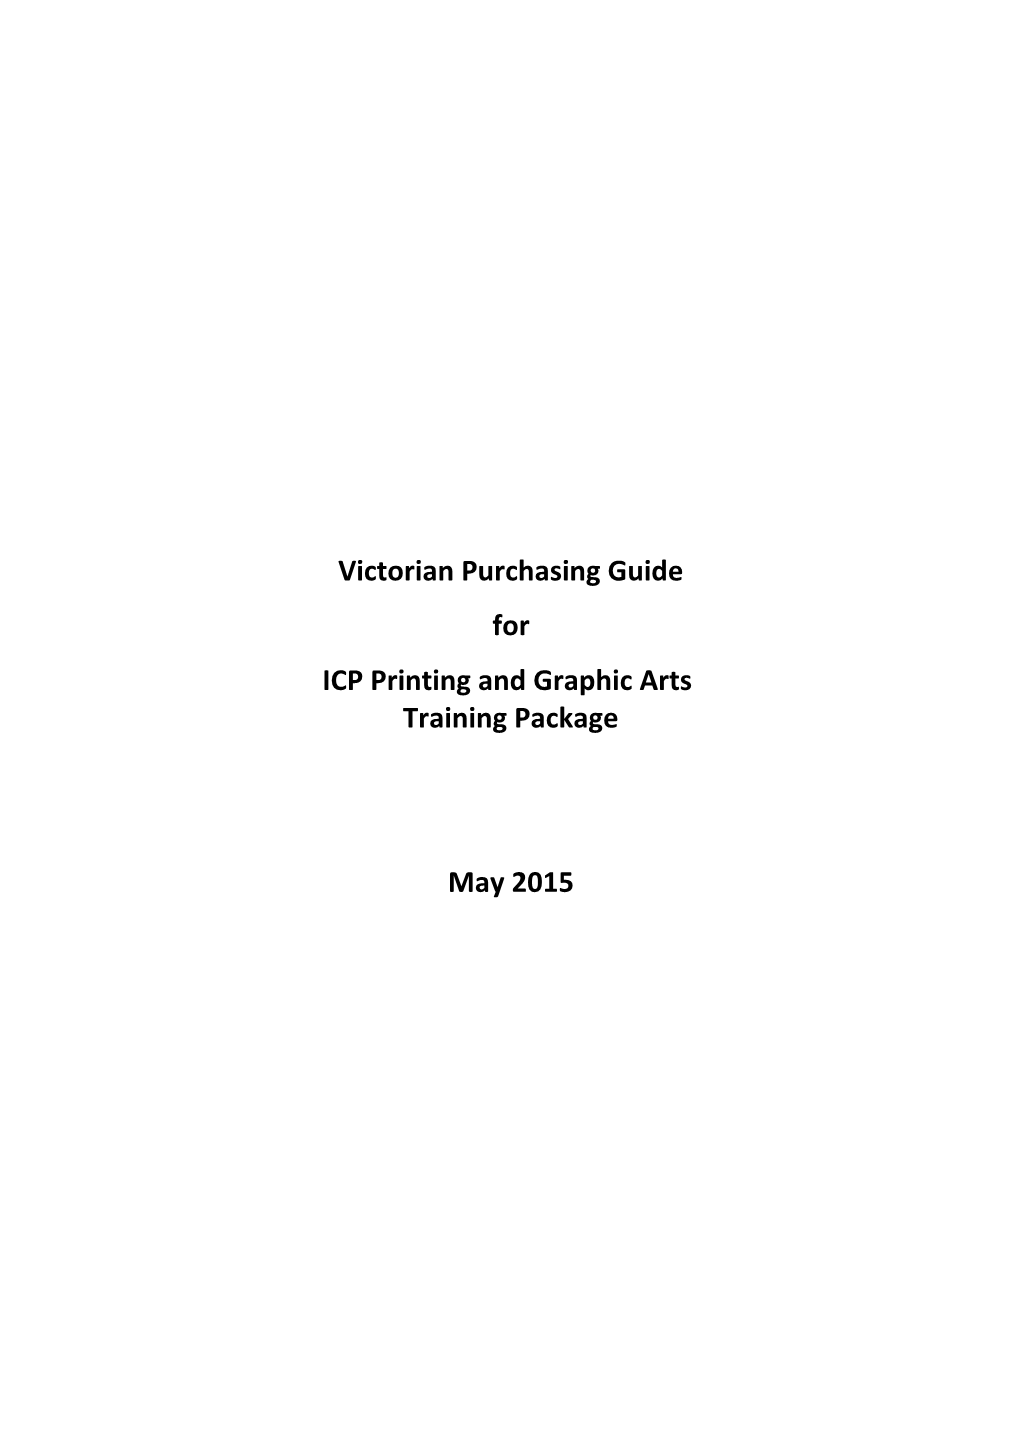 ICP Printing Victorian Purchasing Guide